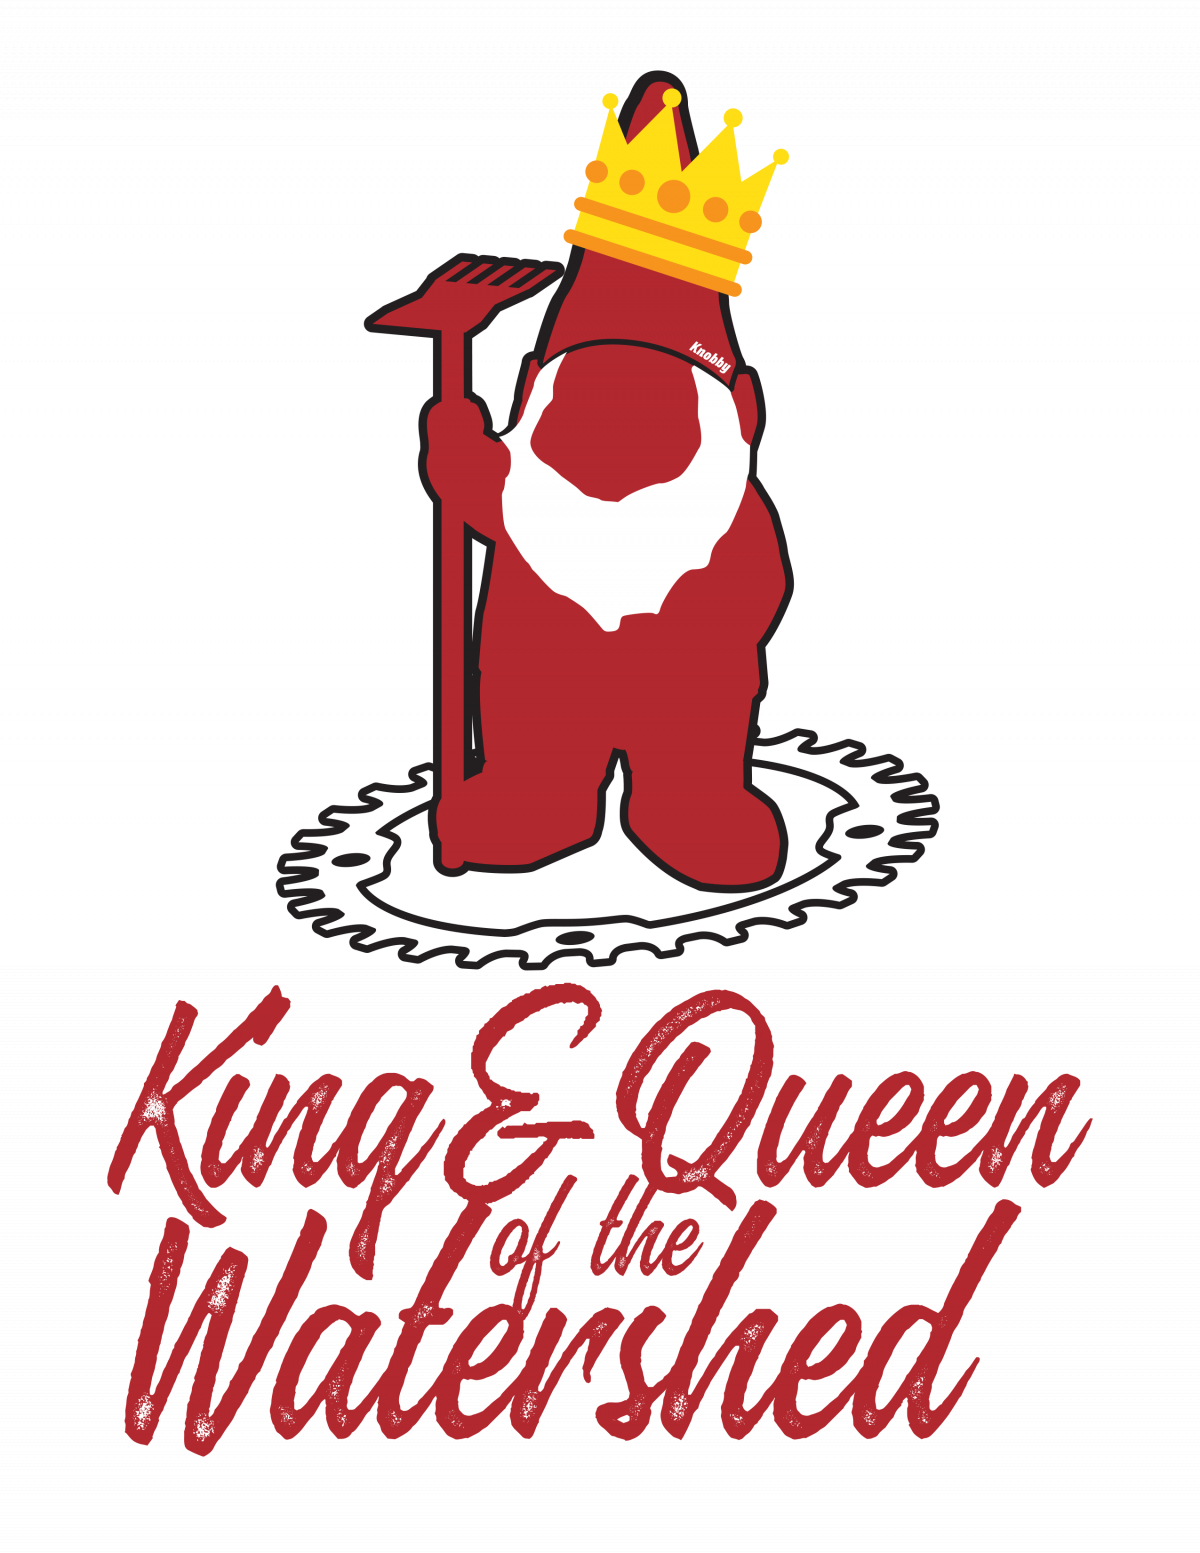 King & Queen of the Watershed